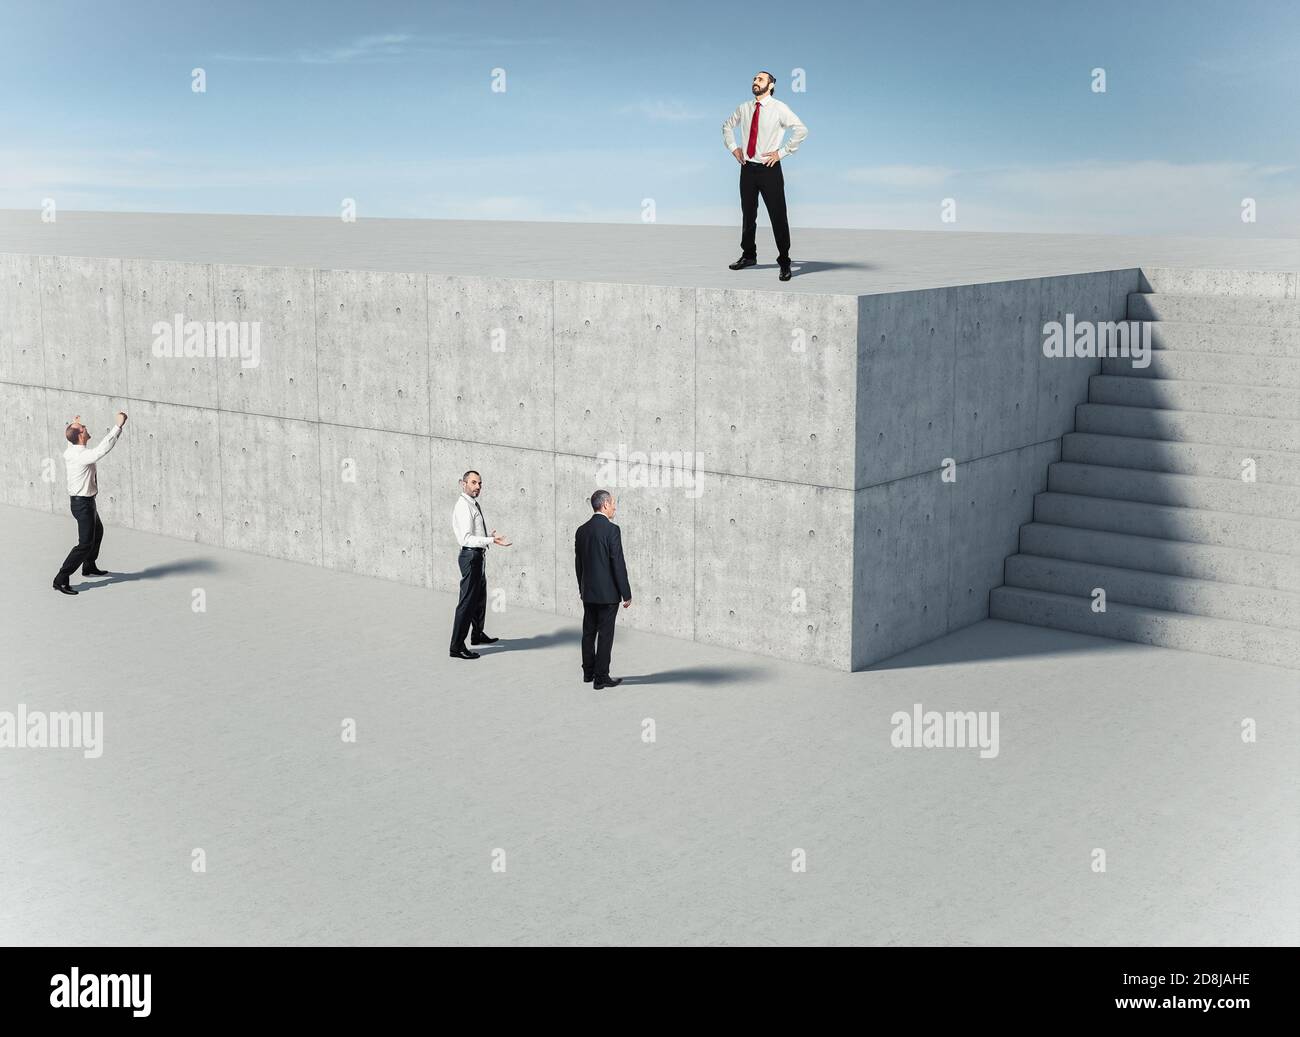 business people in front of a concrete wall, one of them finds the solution and uses the stairs. Concept of resourcefulness and problem solving. Stock Photo